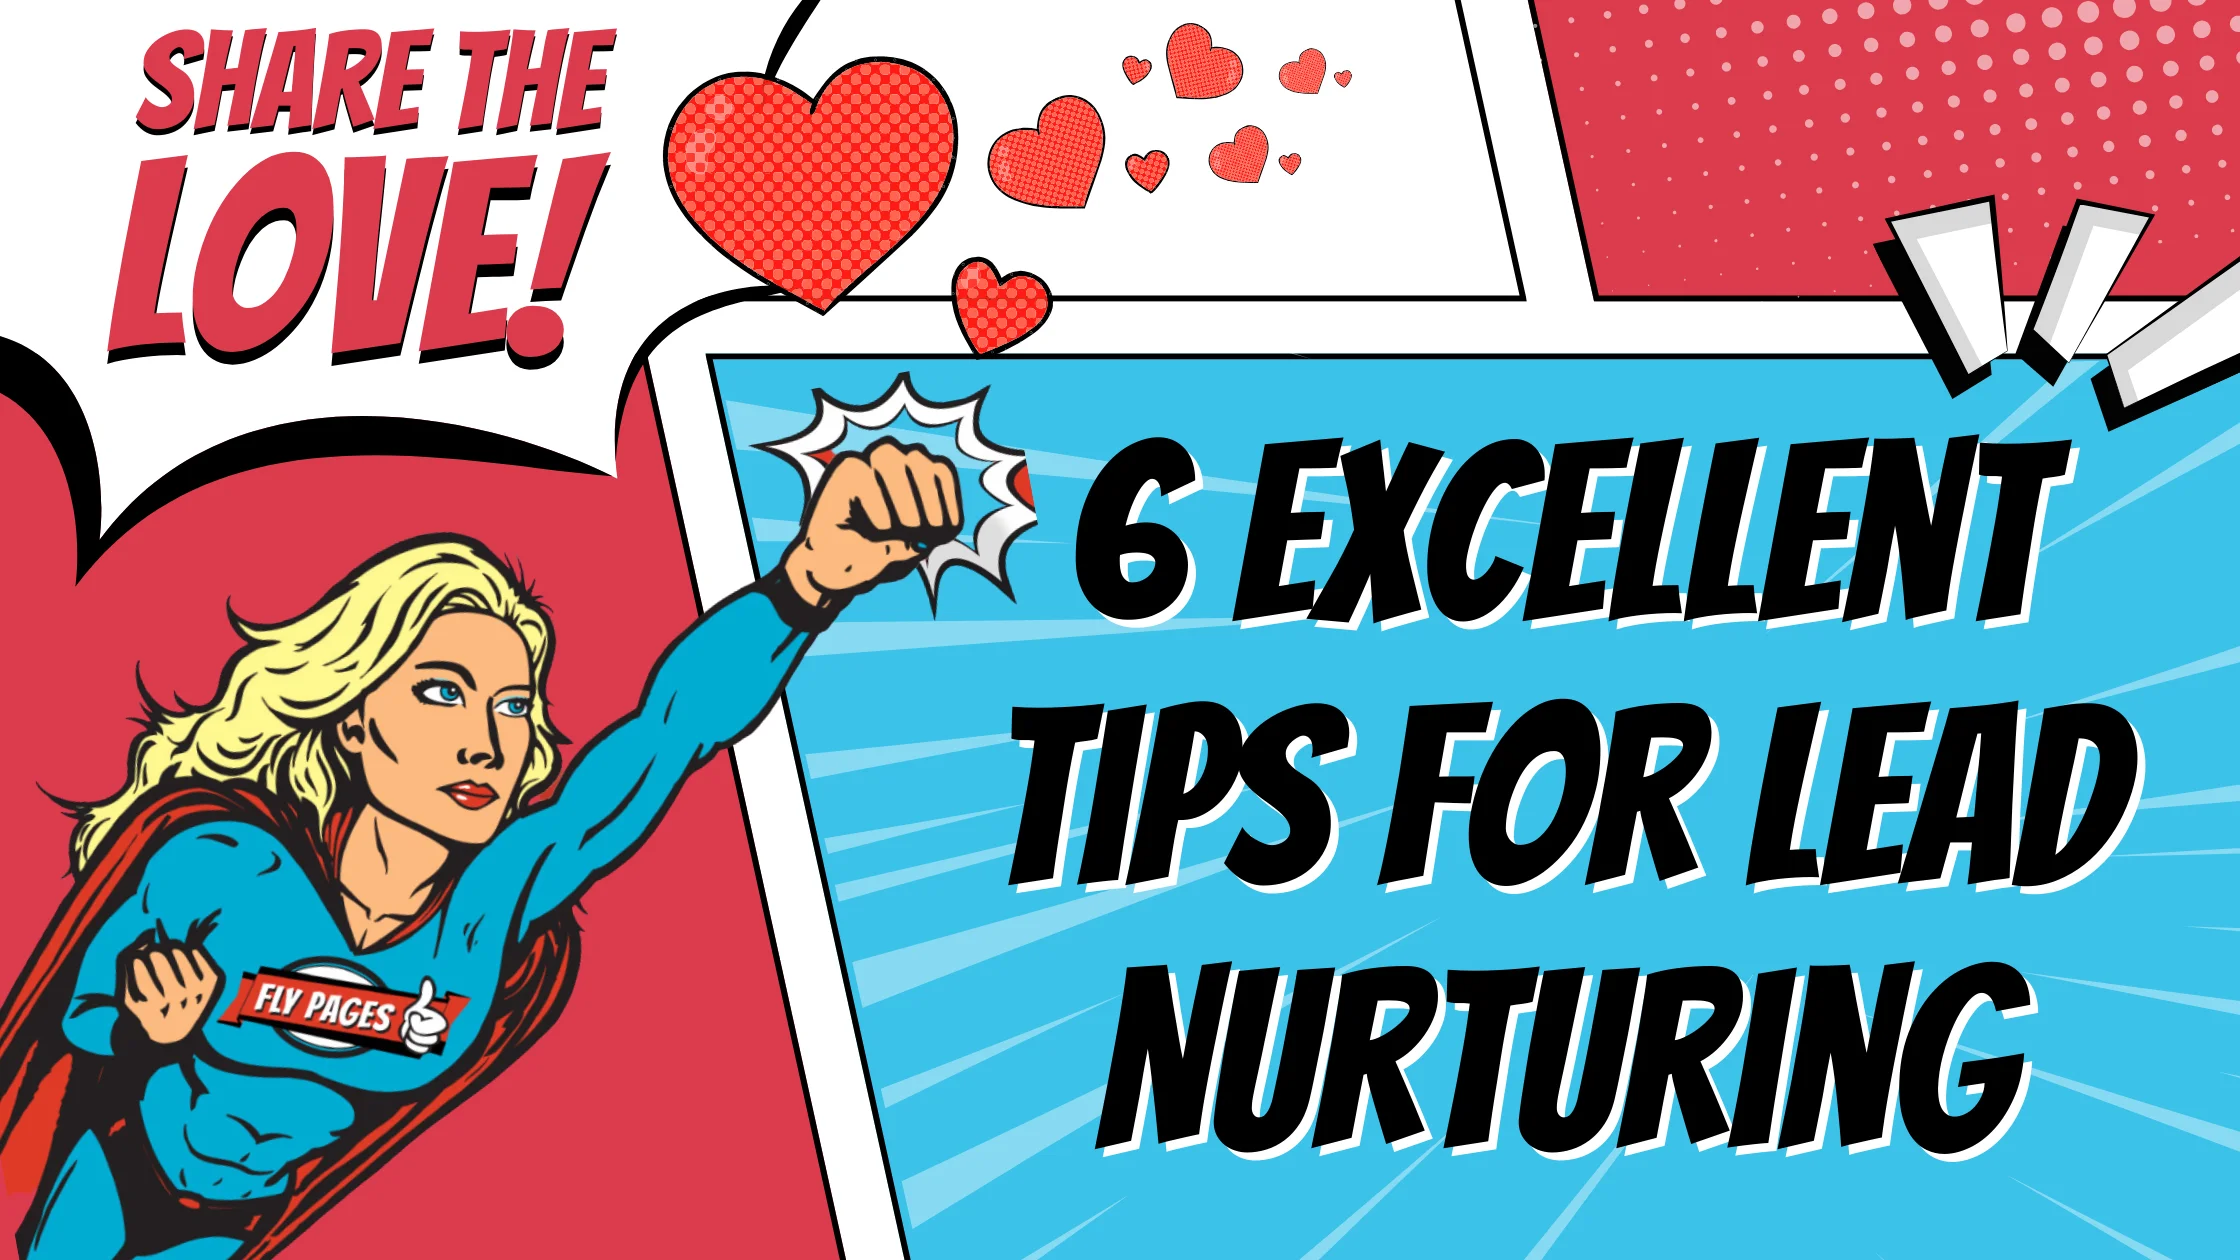 Share the love! 5 Excellent Tips for Lead Nurturing